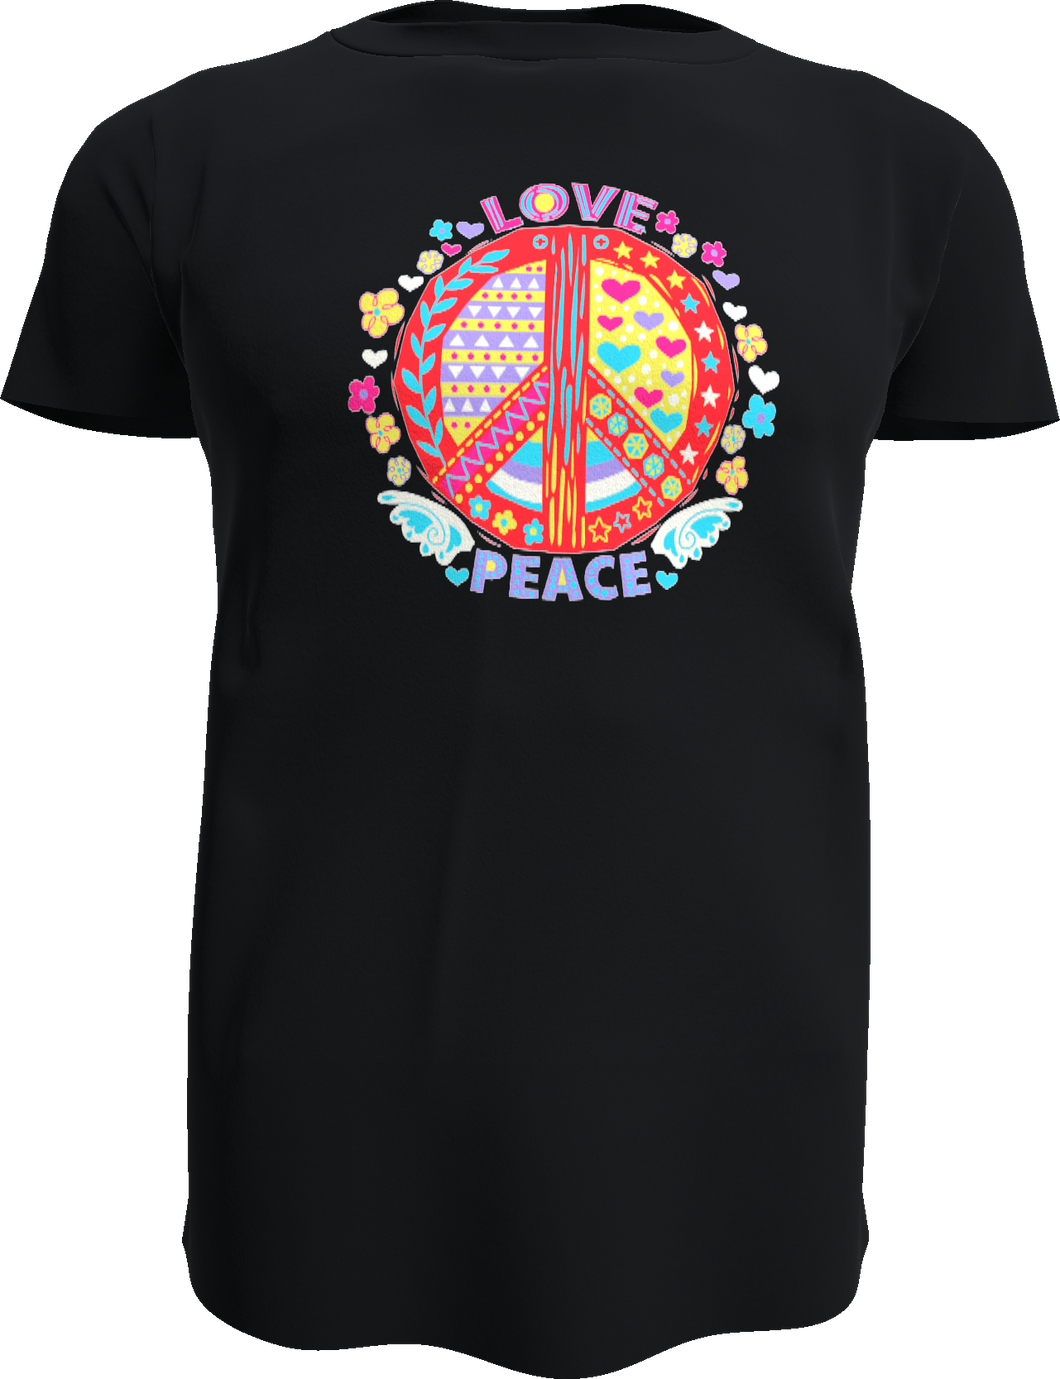 Love and Peace Shirt in bunt